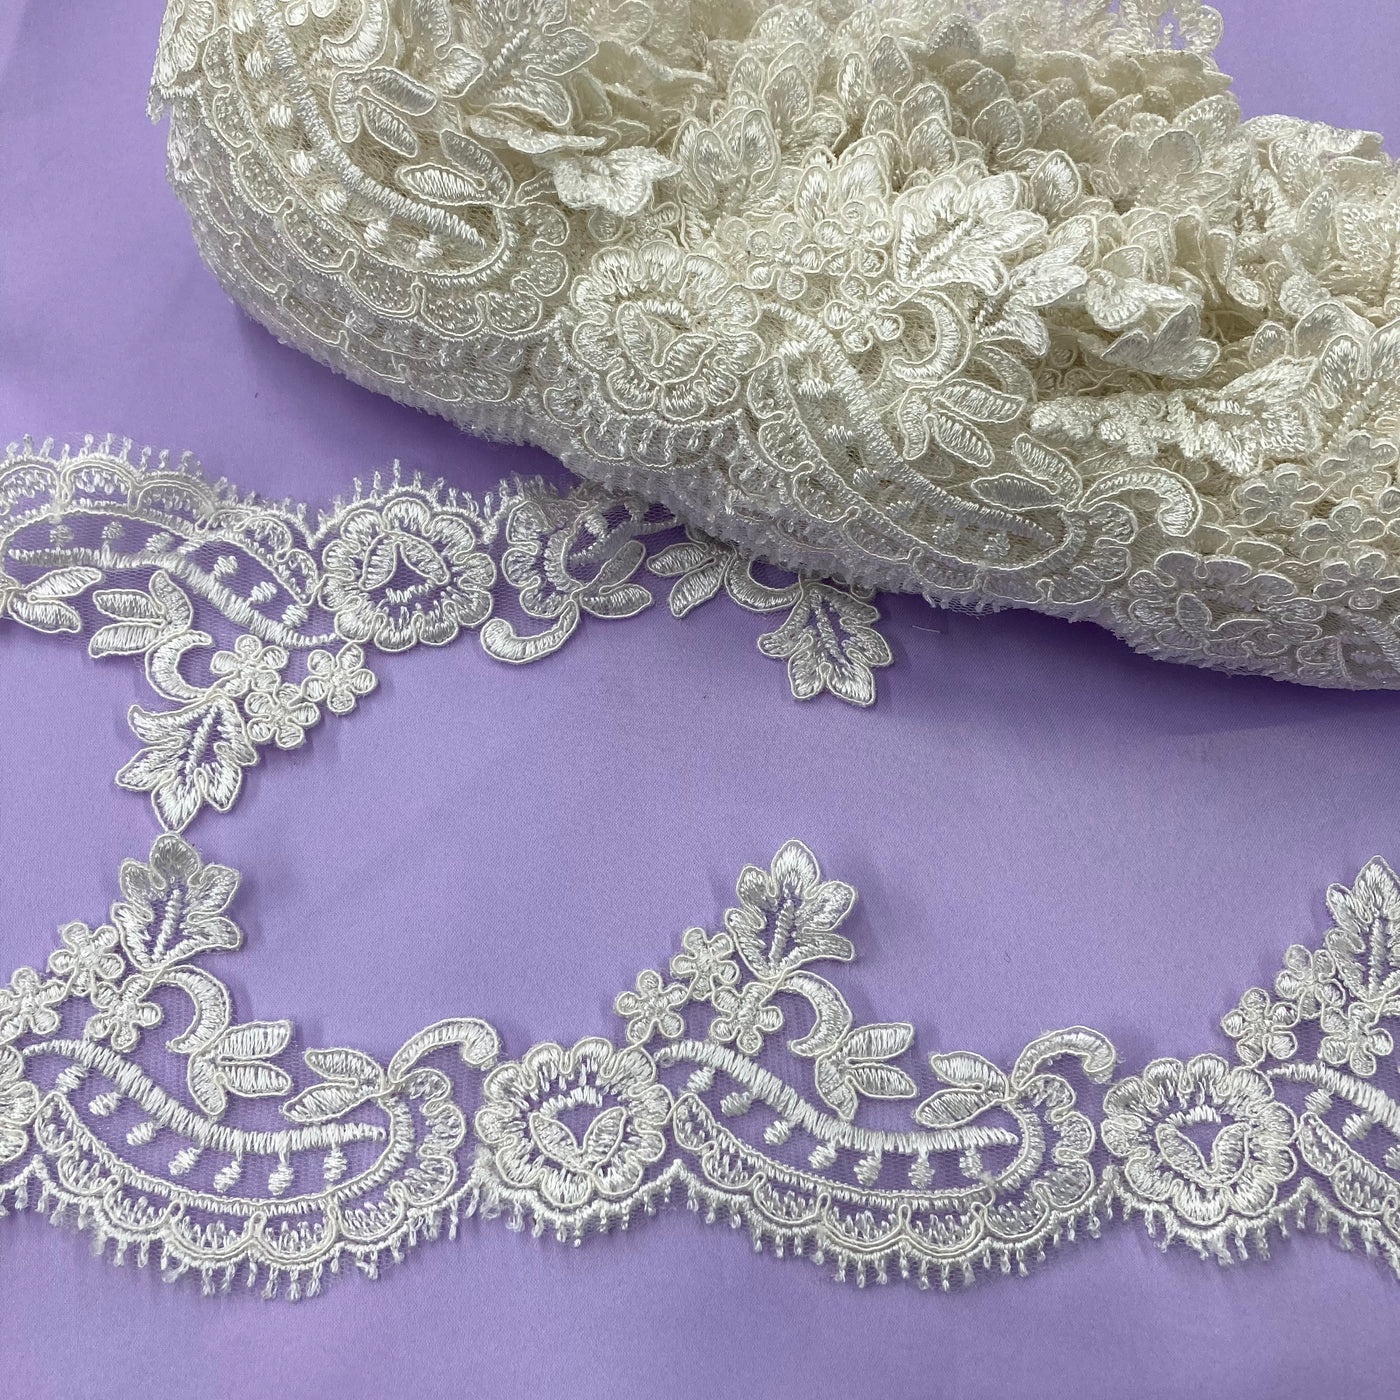 Corded Lace Trimming Embroidered on Poly. Net Mesh. Lace USA